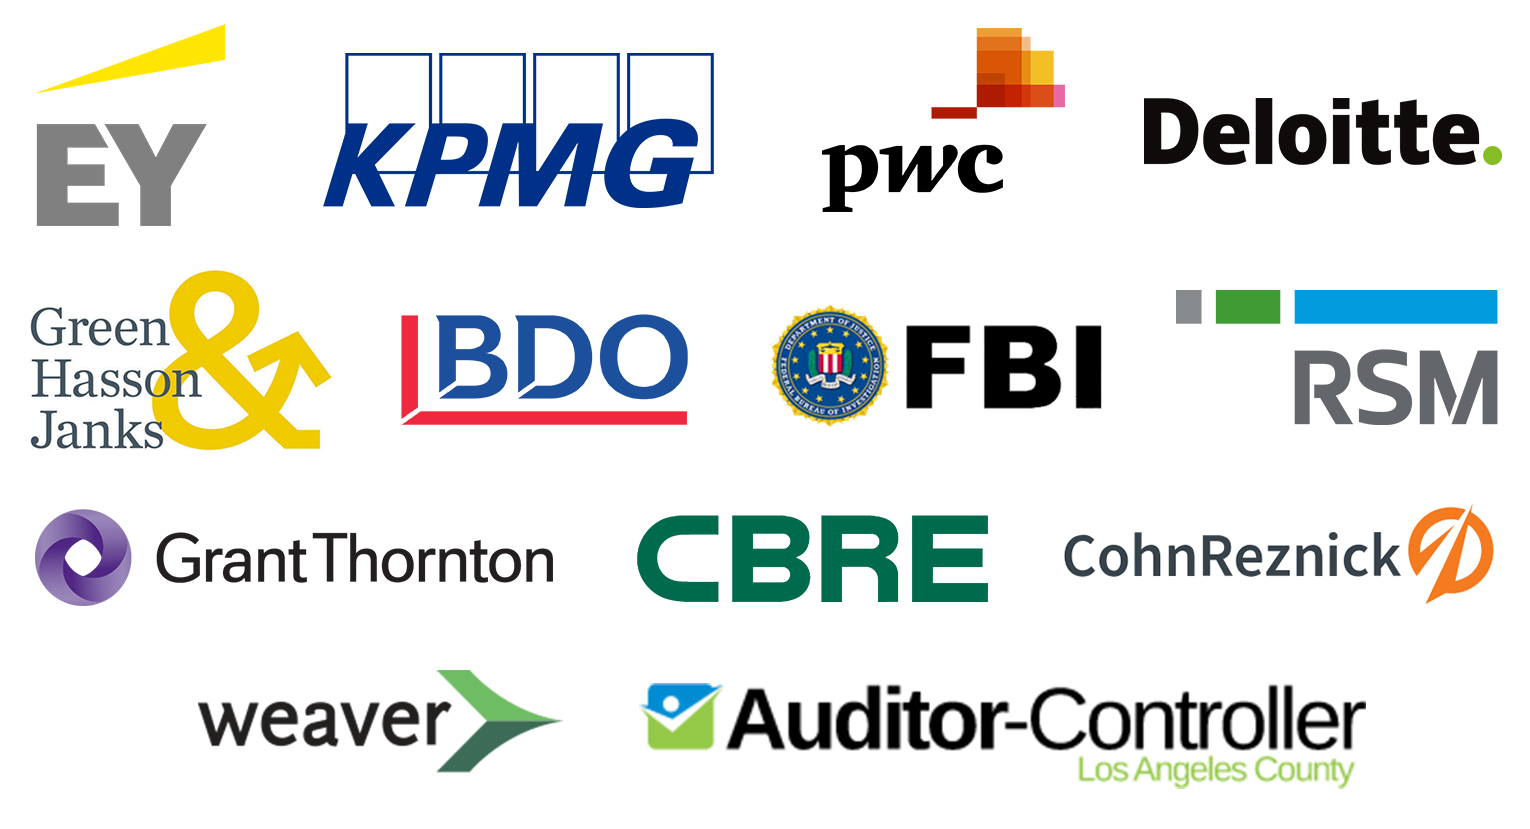 Collage of Institutions Logos, including BDO, CBRE, CohnReznick, Deloitte, EY, FBI, Grant Thornton, Green Hasson Janks, KPMG, Los Angeles County Auditors, PwC, RSM and Weaver